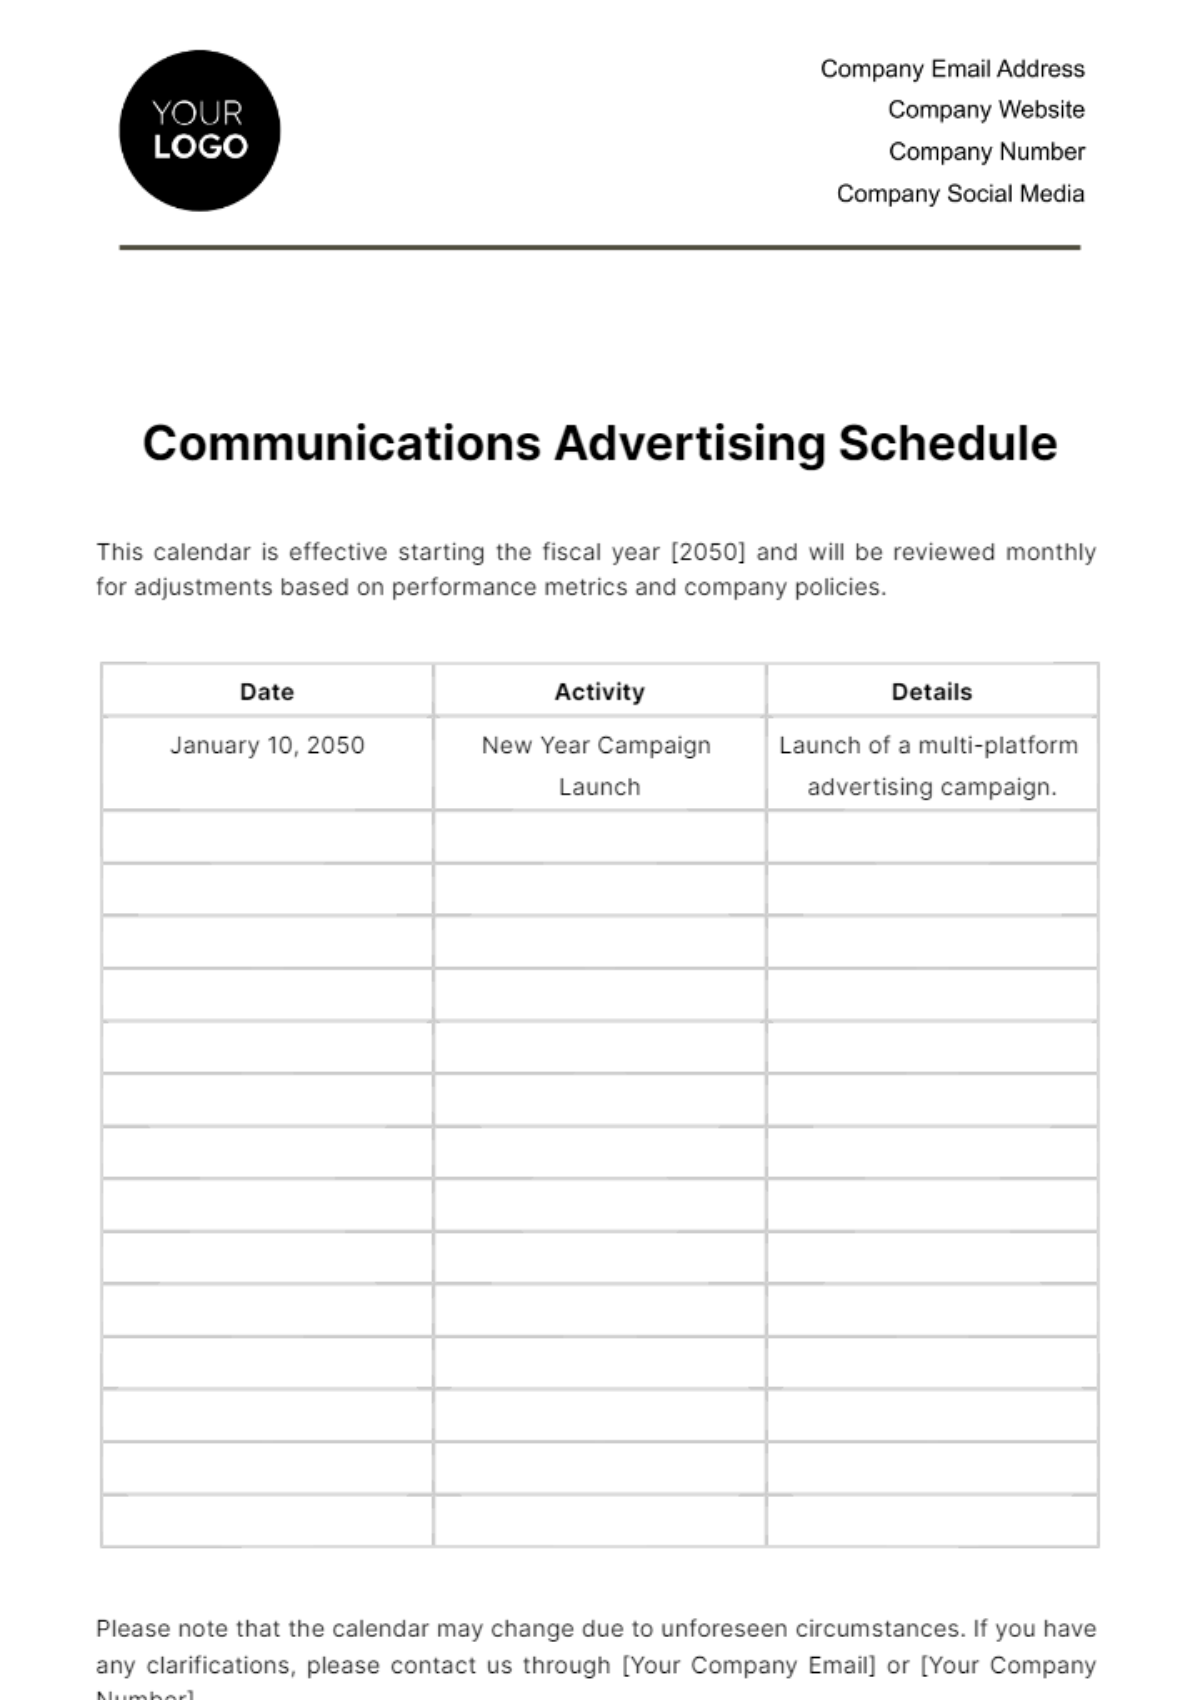 Free Communications Advertising Schedule Template